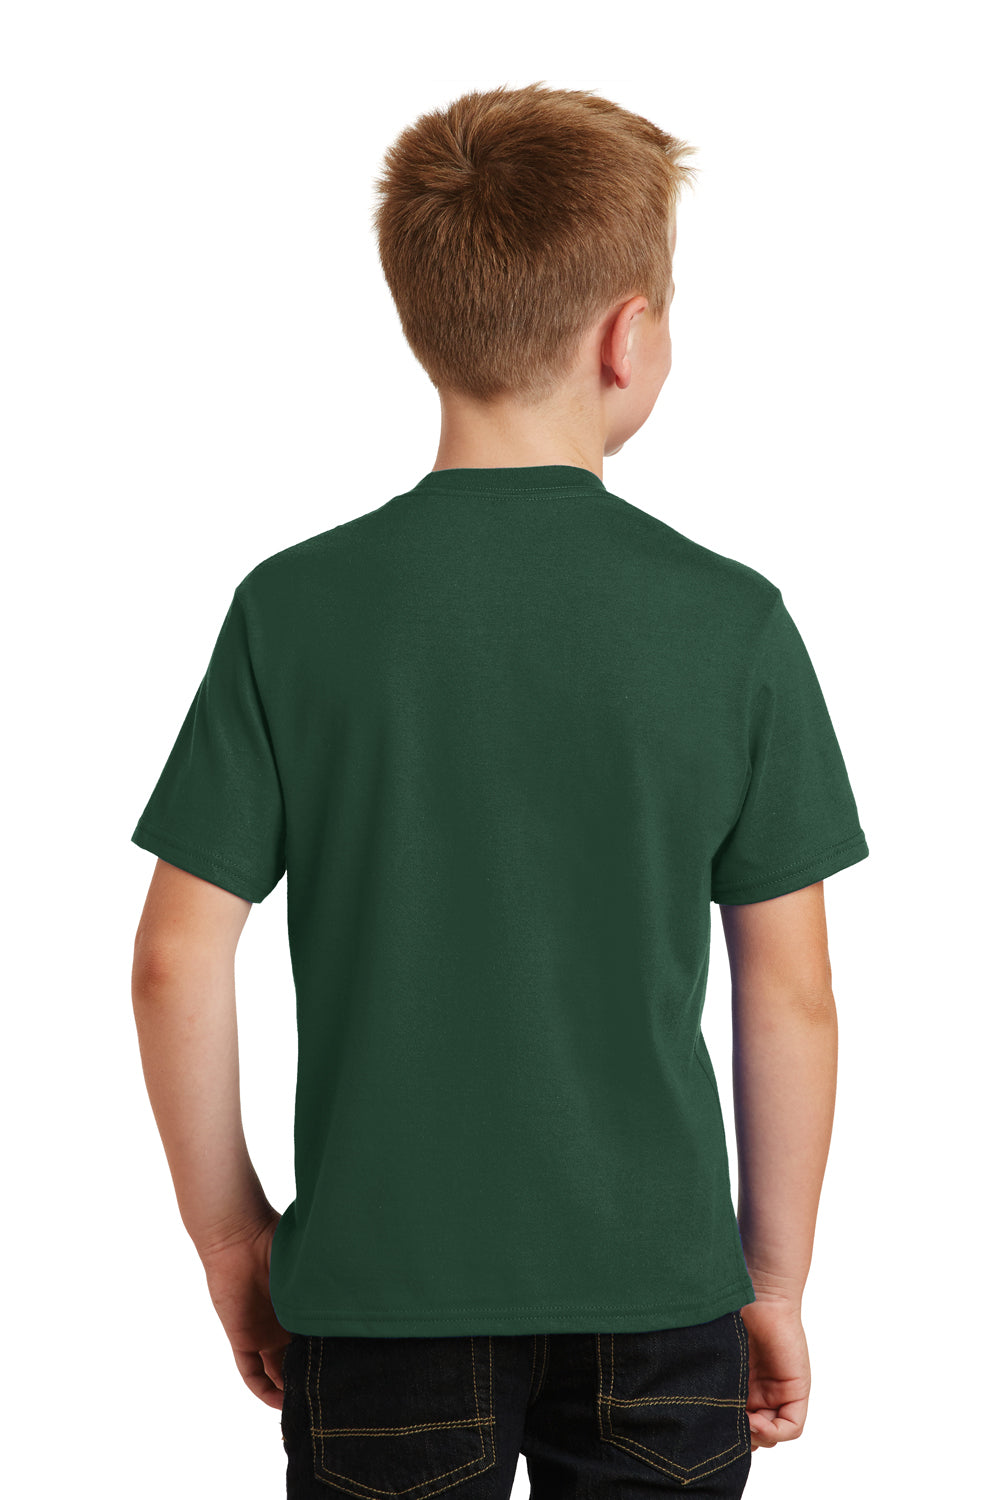 Port & Company PC450Y Youth Fan Favorite Short Sleeve Crewneck T-Shirt Forest Green Back